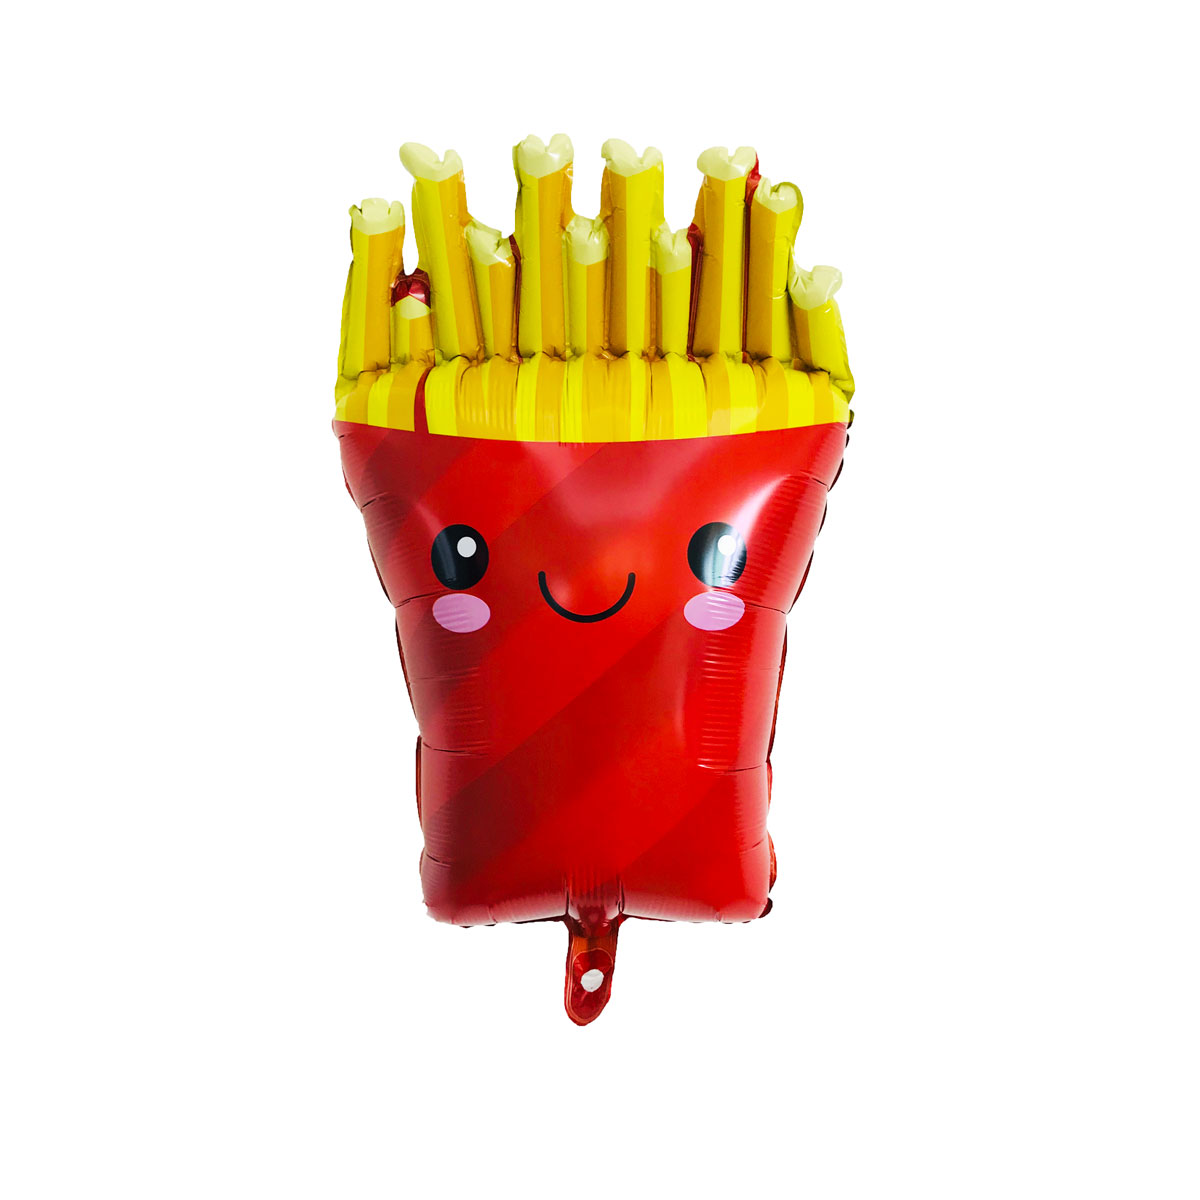 French fries-HEWN-C2093